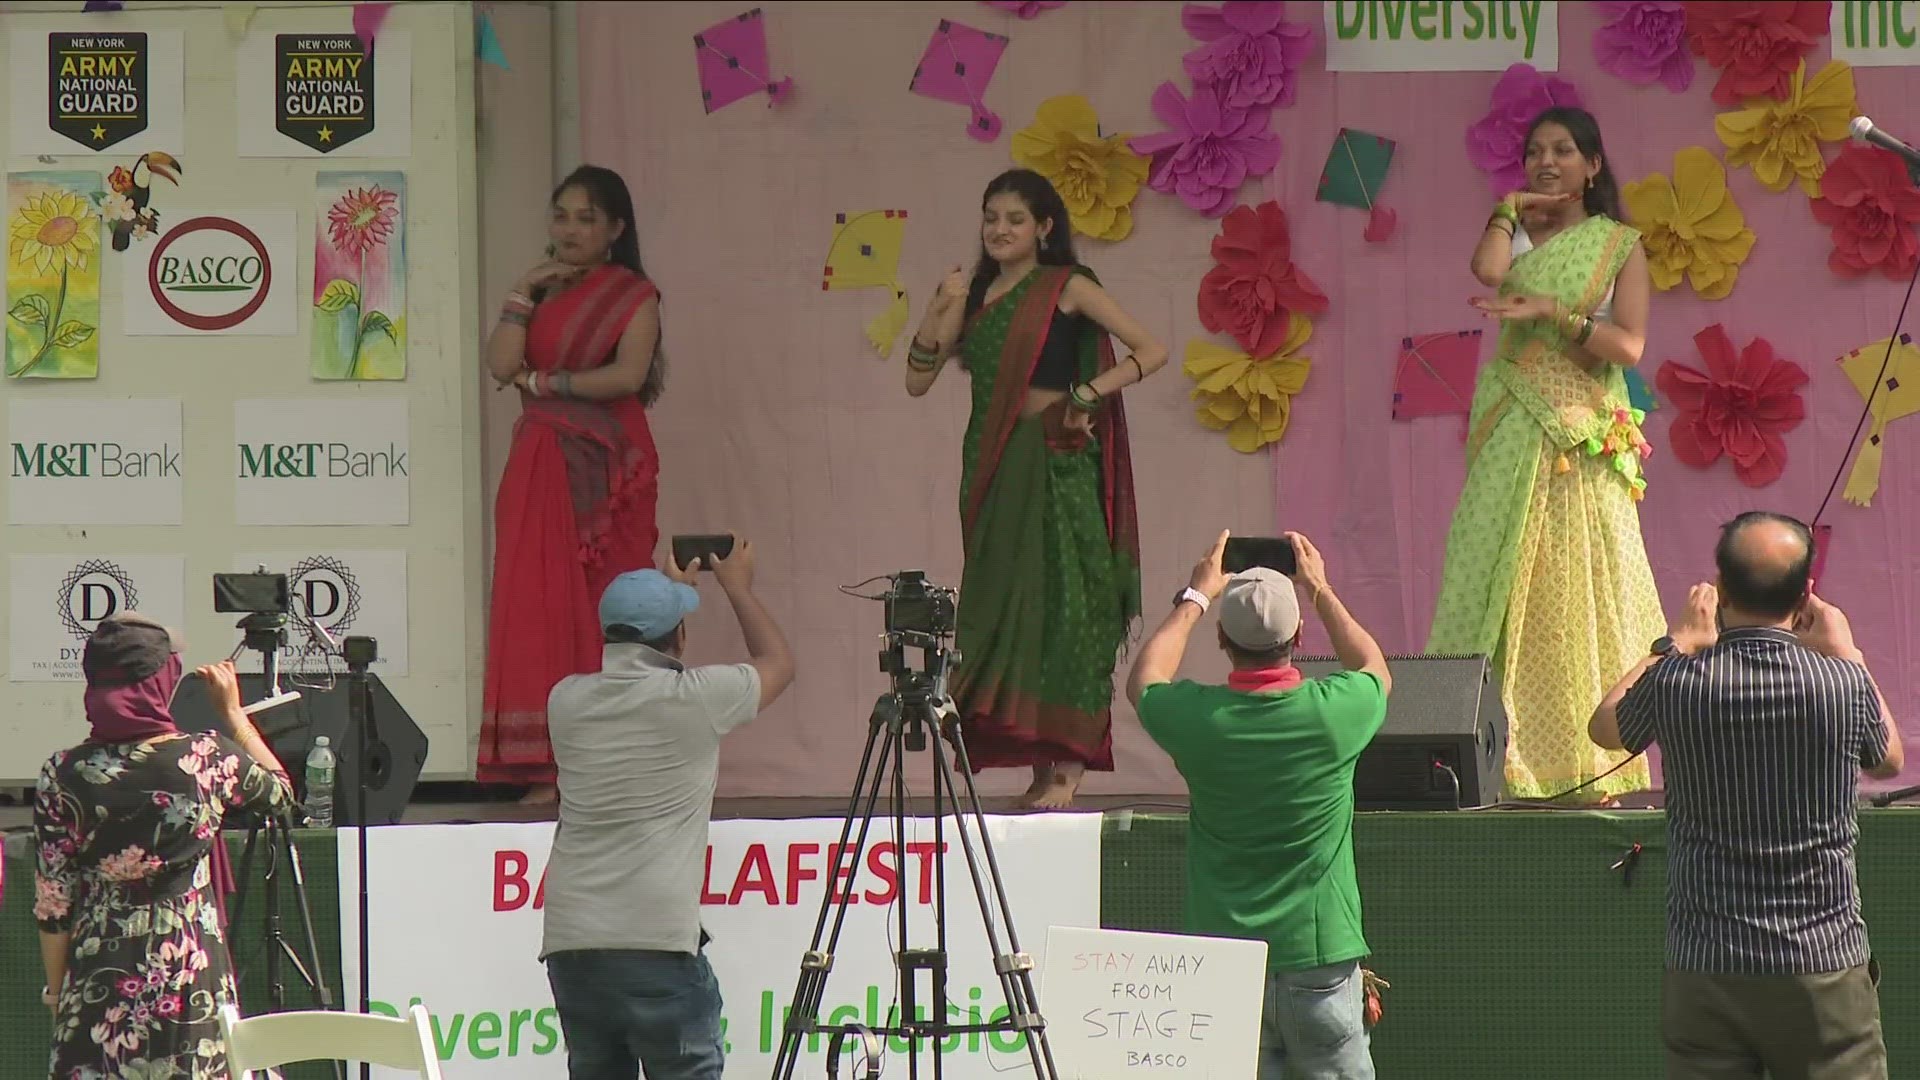 A local Bangladeshi organization, BASCO, celebrates diversity and inclusion. This is the 3rd year for BanglaFest.